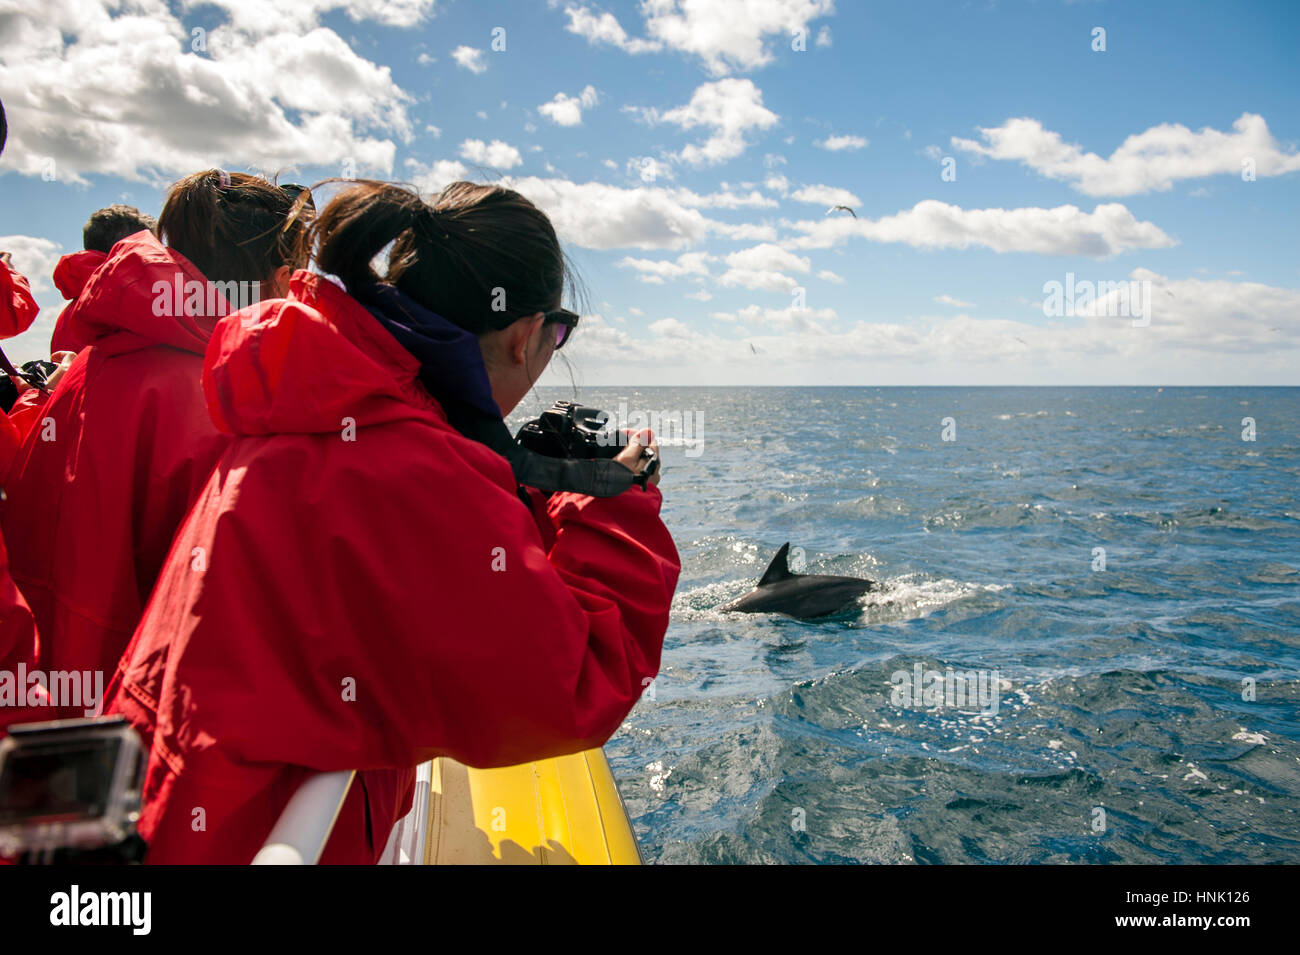 Tourists photograph dolphins off the coast of the Tasman Peninsula. The tourists are on a cruise with Pennicott Wilderness Journeys. Stock Photo